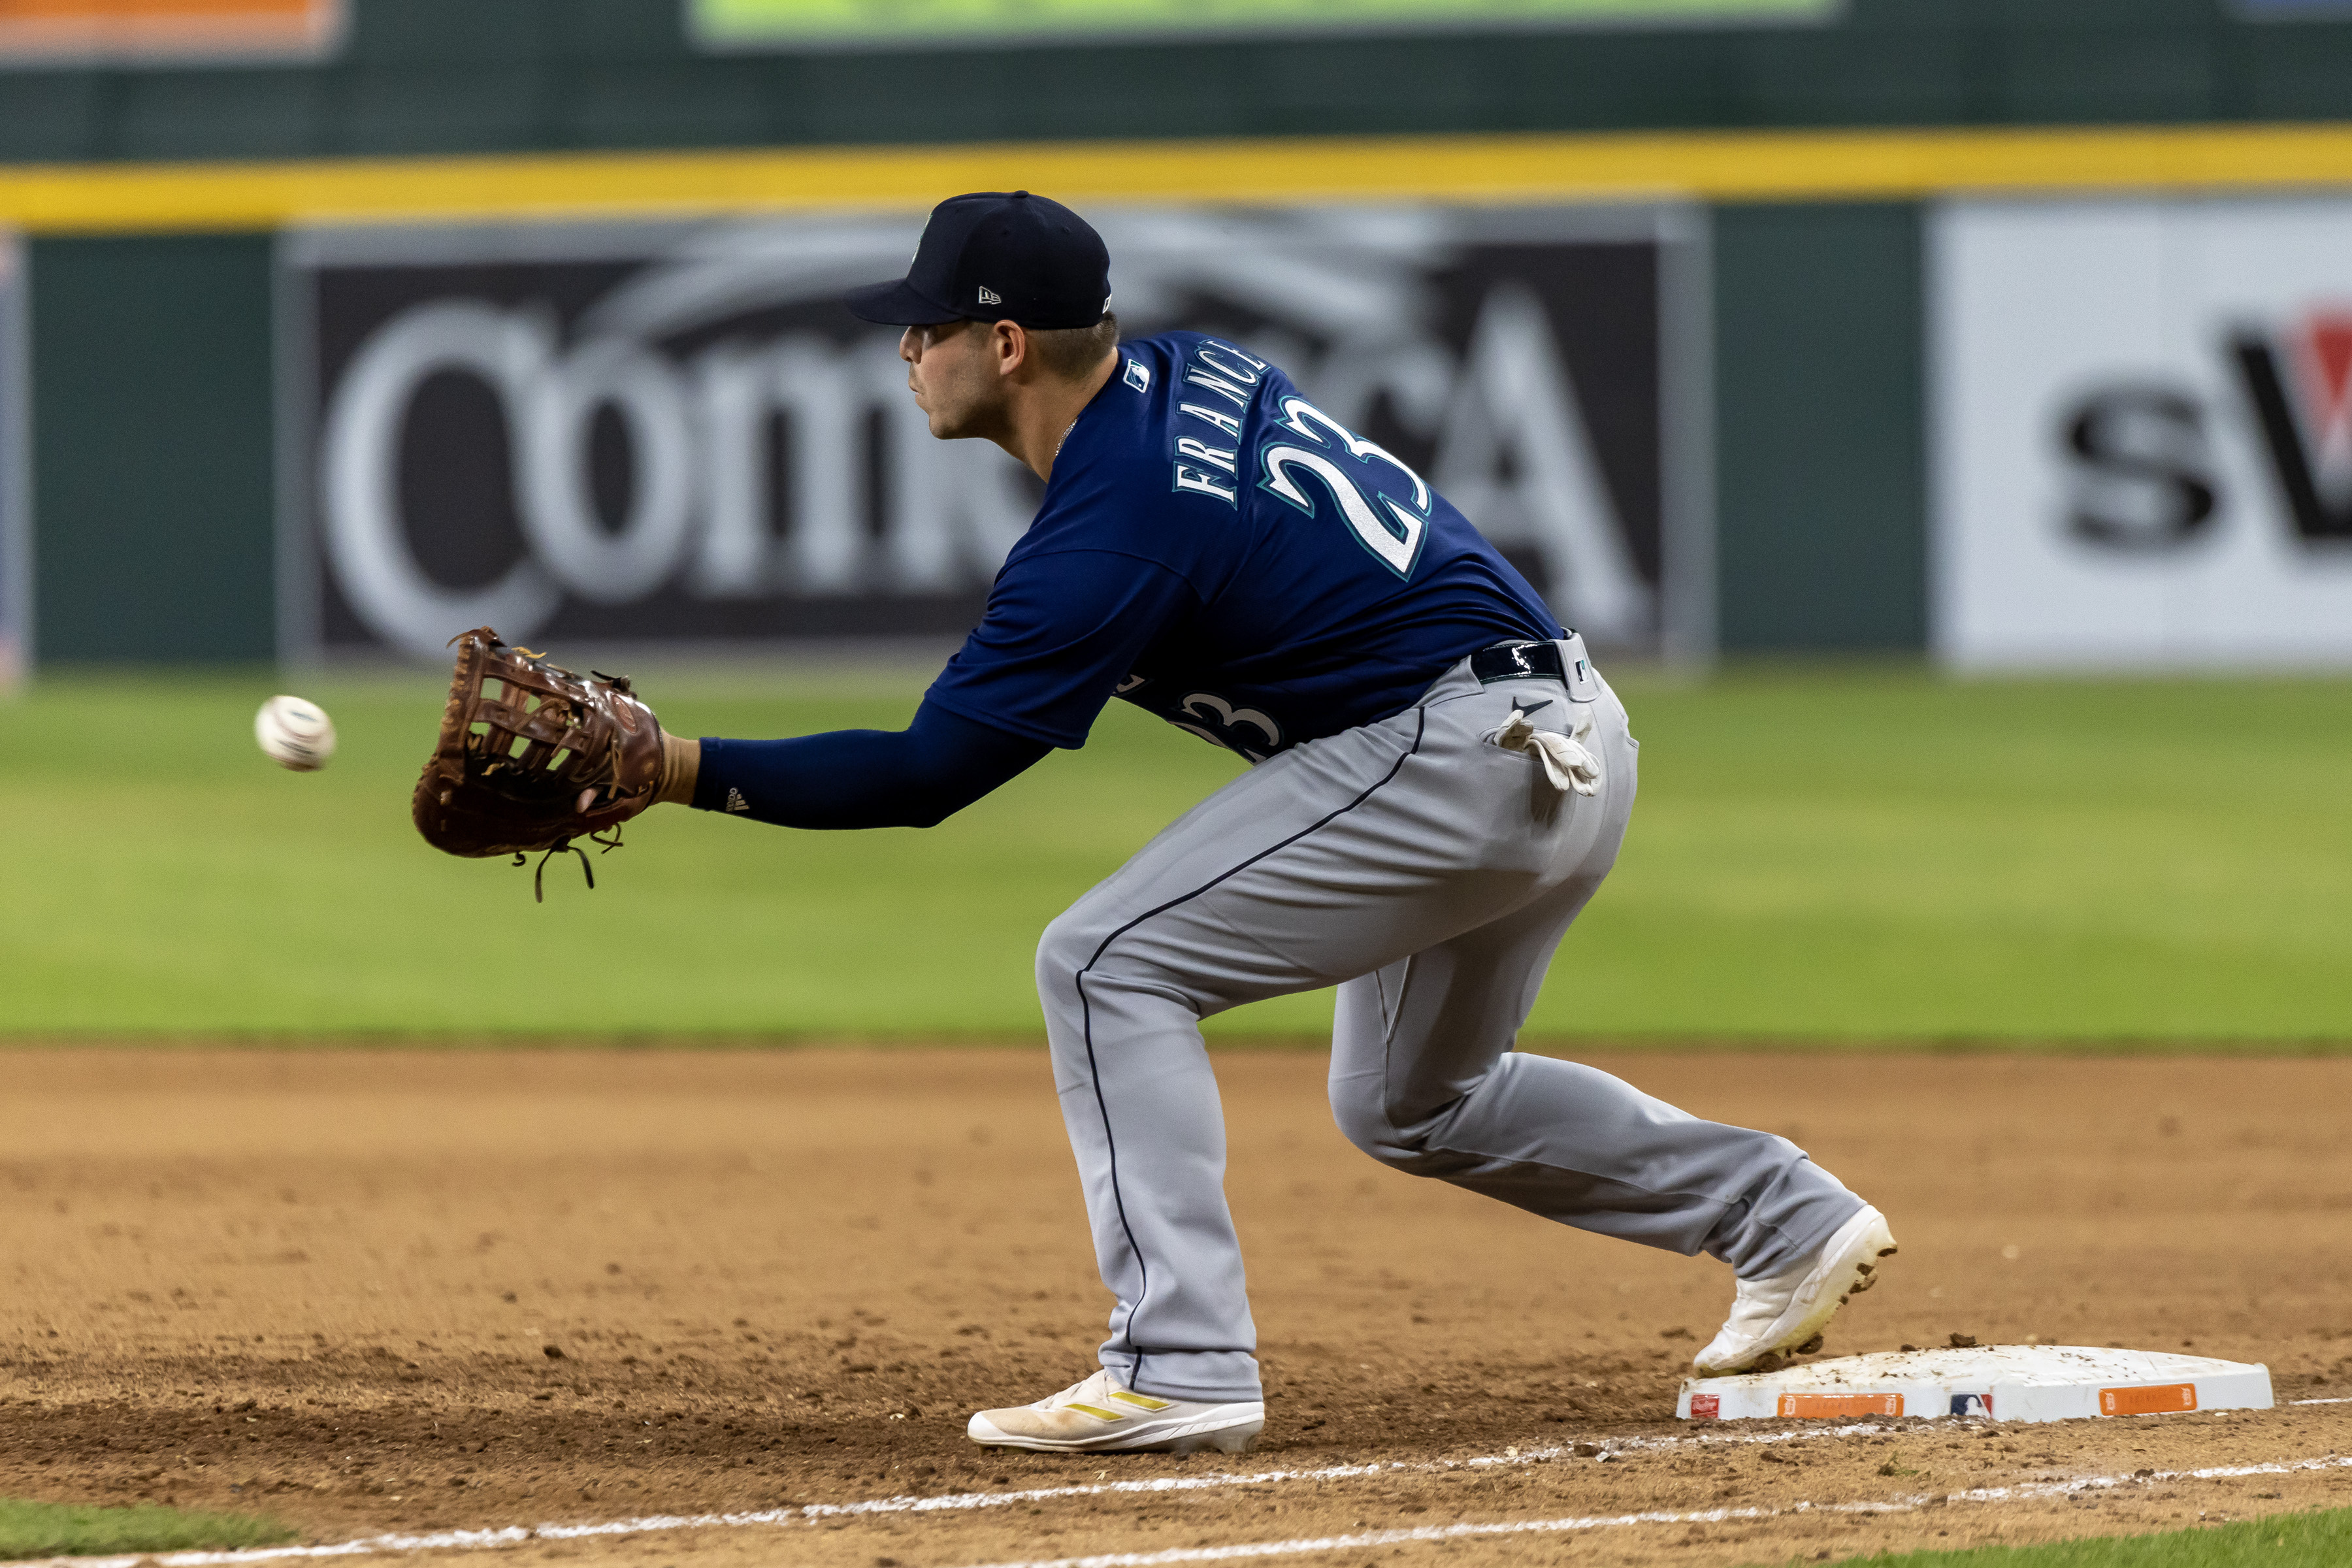 Tigers win, force Mariners to start playoffs on the road – The